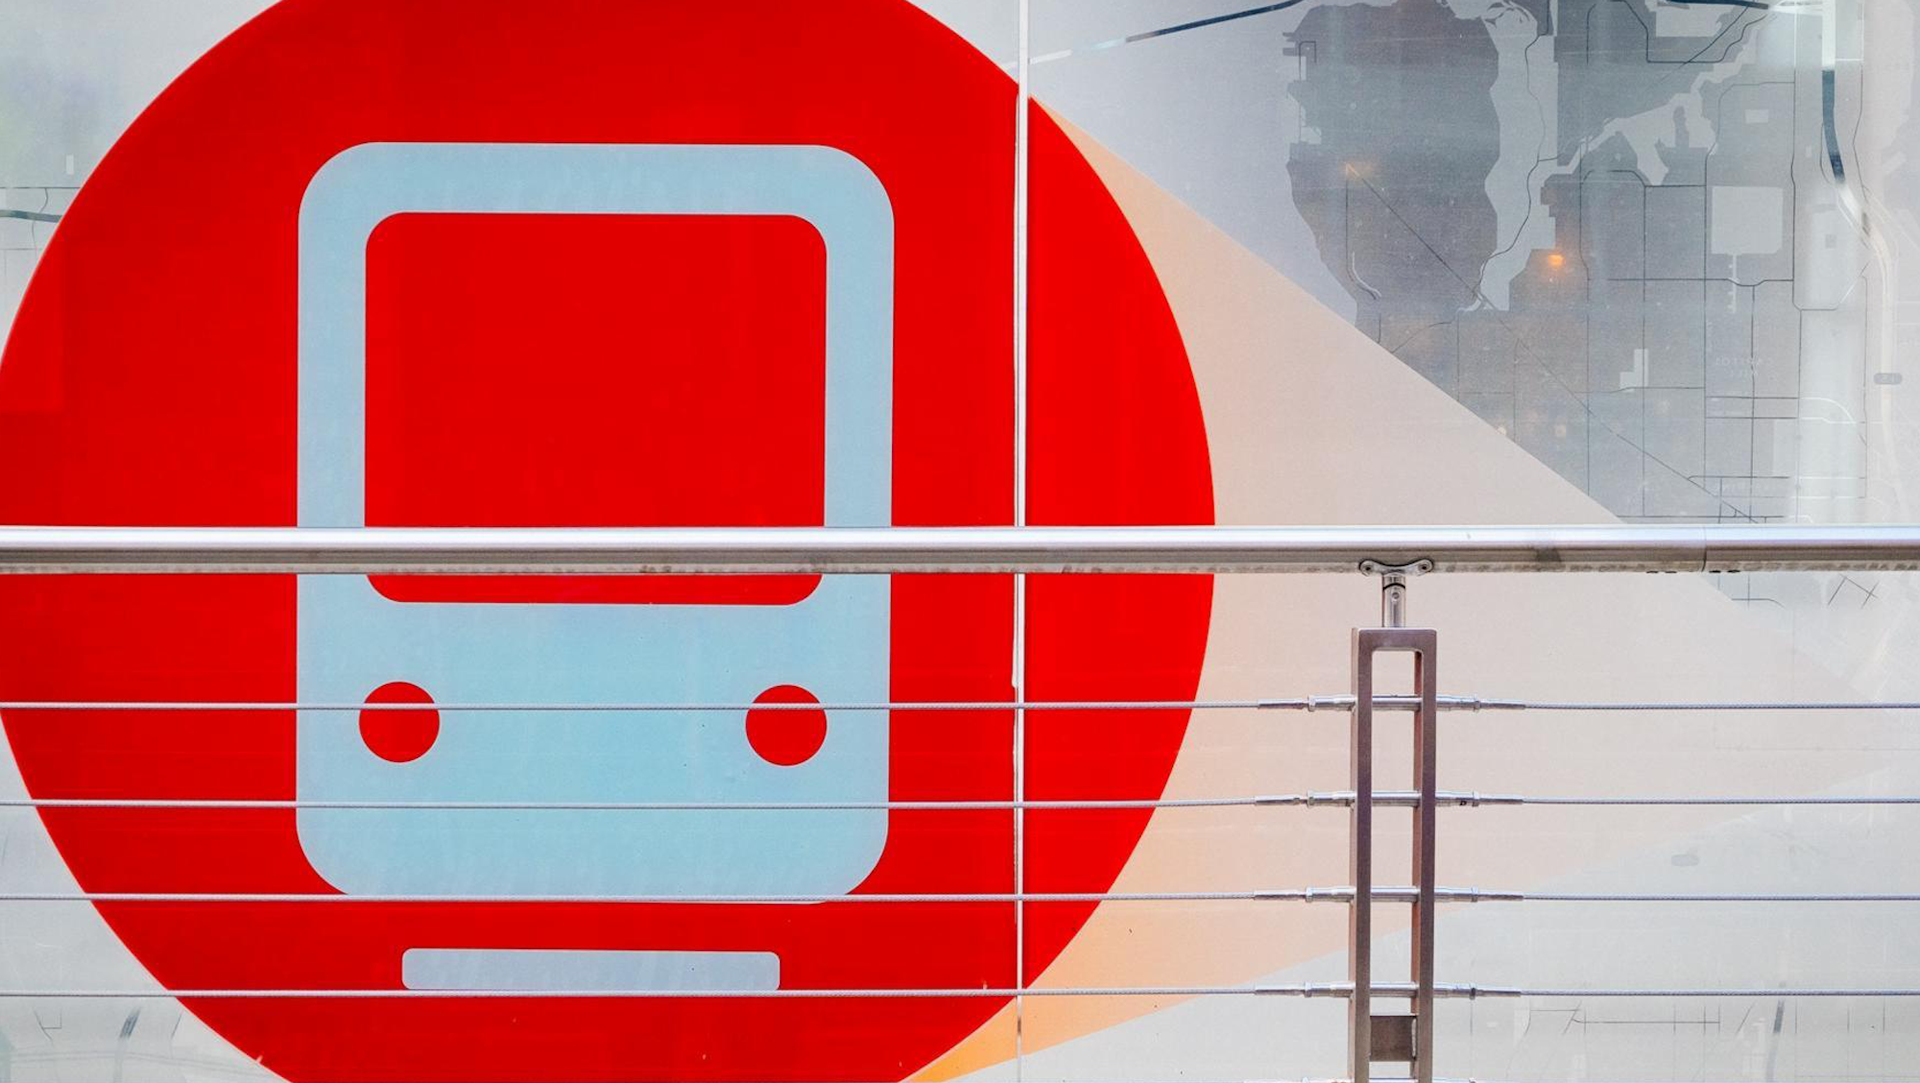 Universal sign for a train against a bright red background